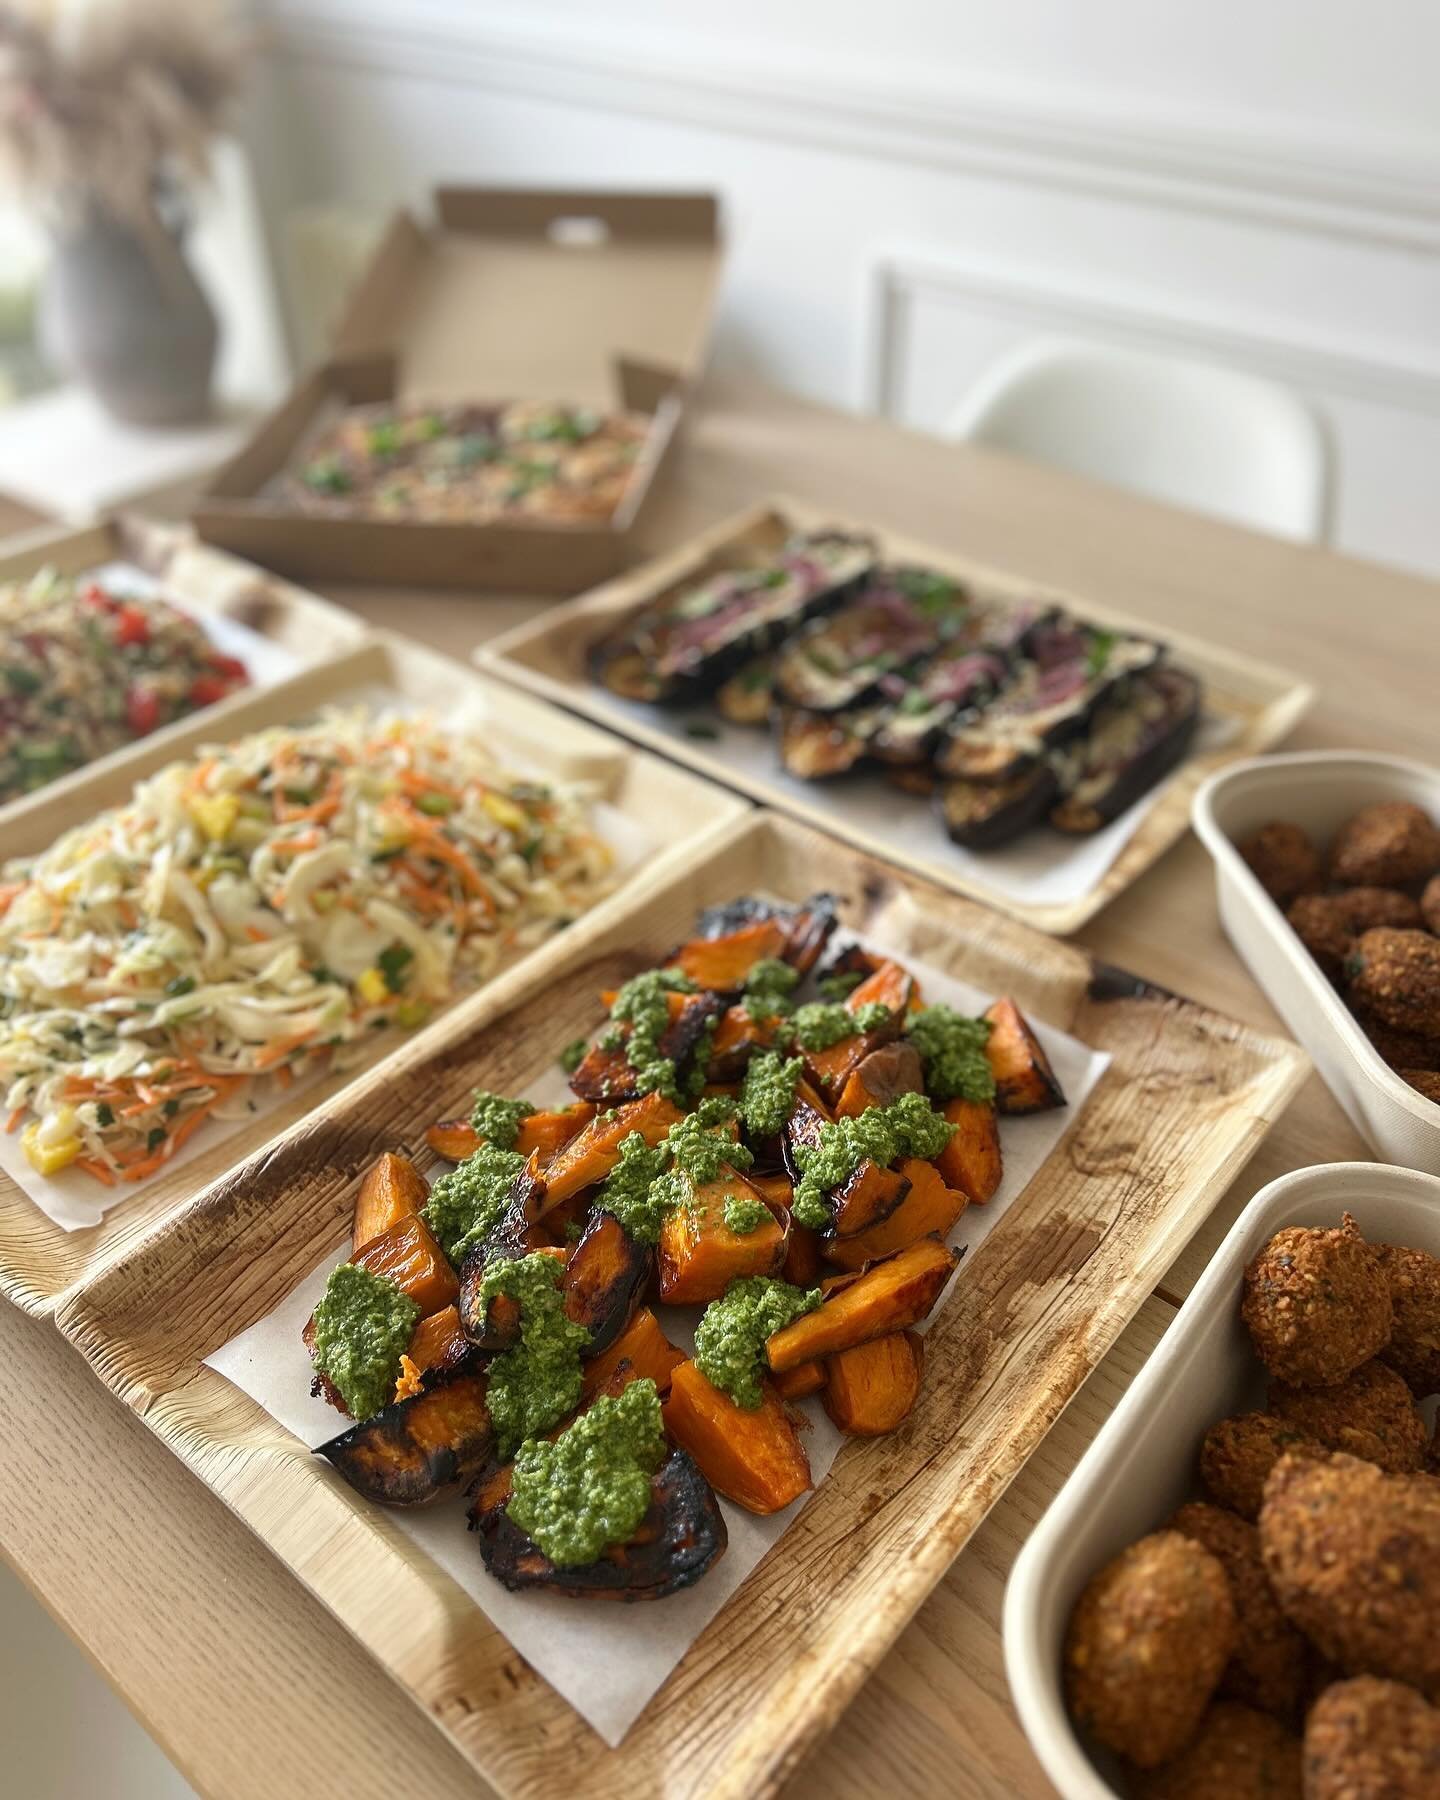 Retreat food 🤎

We&rsquo;ve catered a fair few retreats recently as our food just lends itself so well to this type of event 〰️ Always fresh, healthy and wholesome food using good quality ingredients, that&rsquo;s full of f l a v o u r 🌱

If you&rs